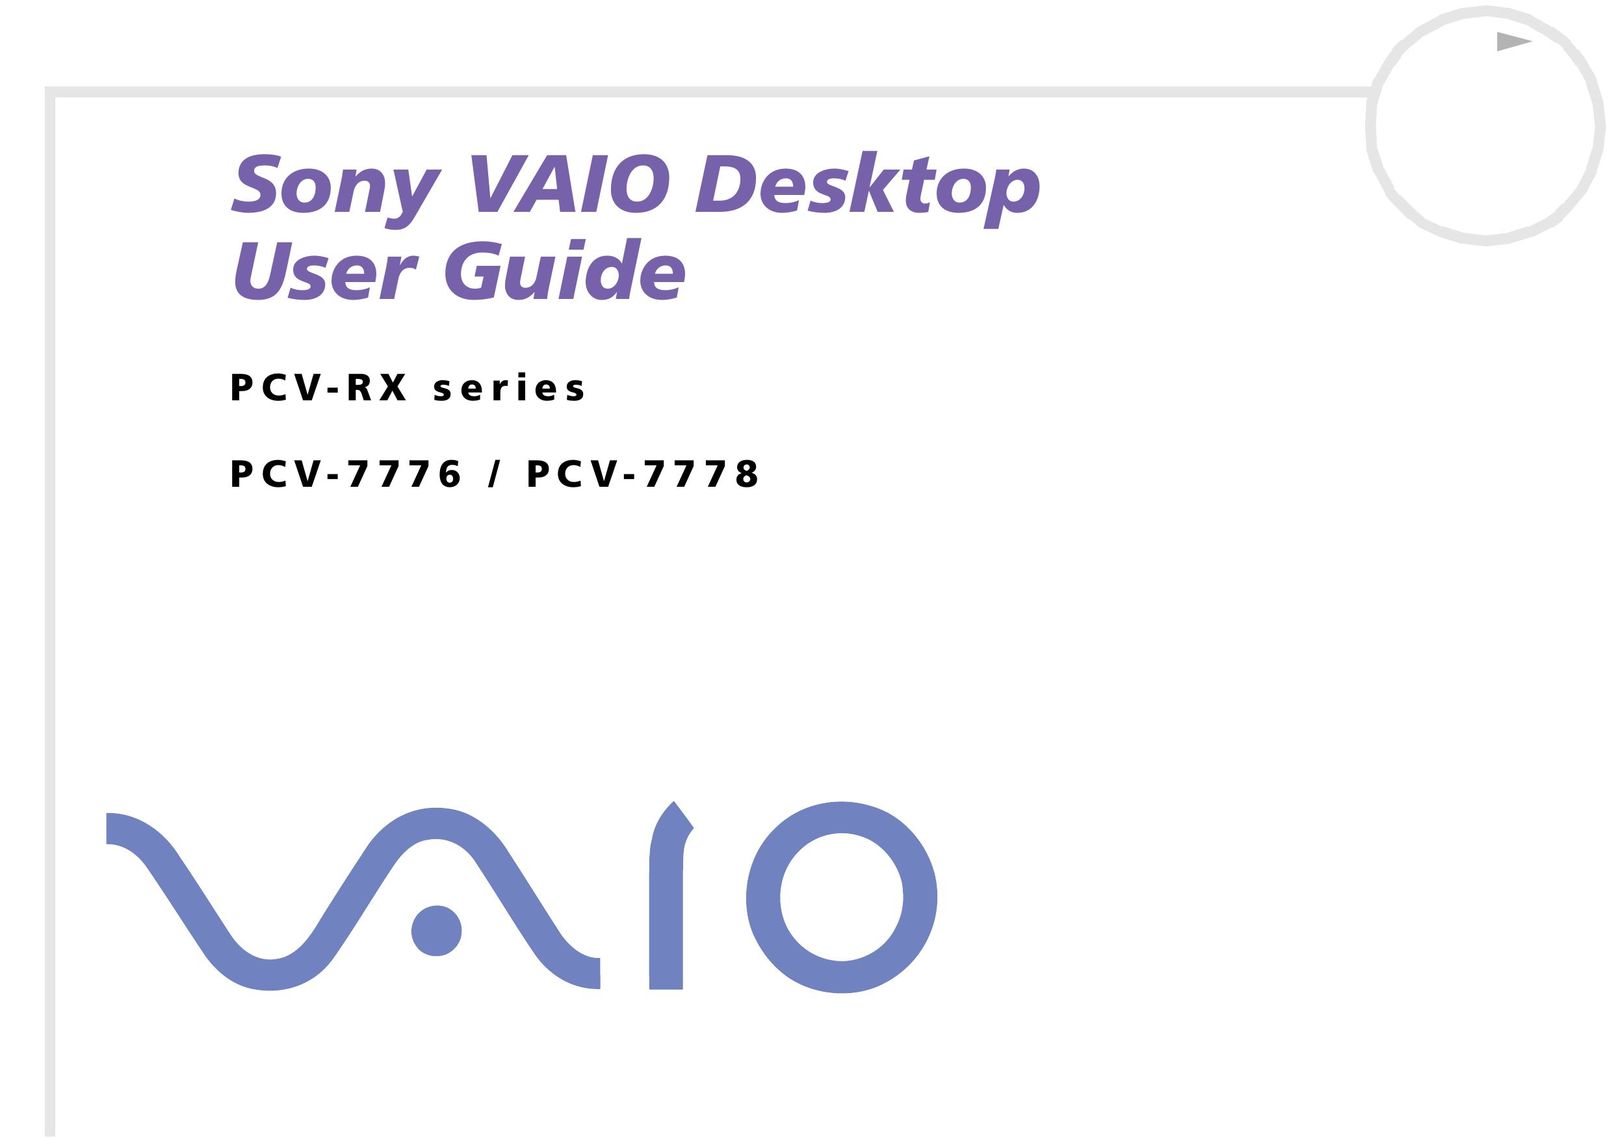 Sony PCV-7778 Personal Computer User Manual